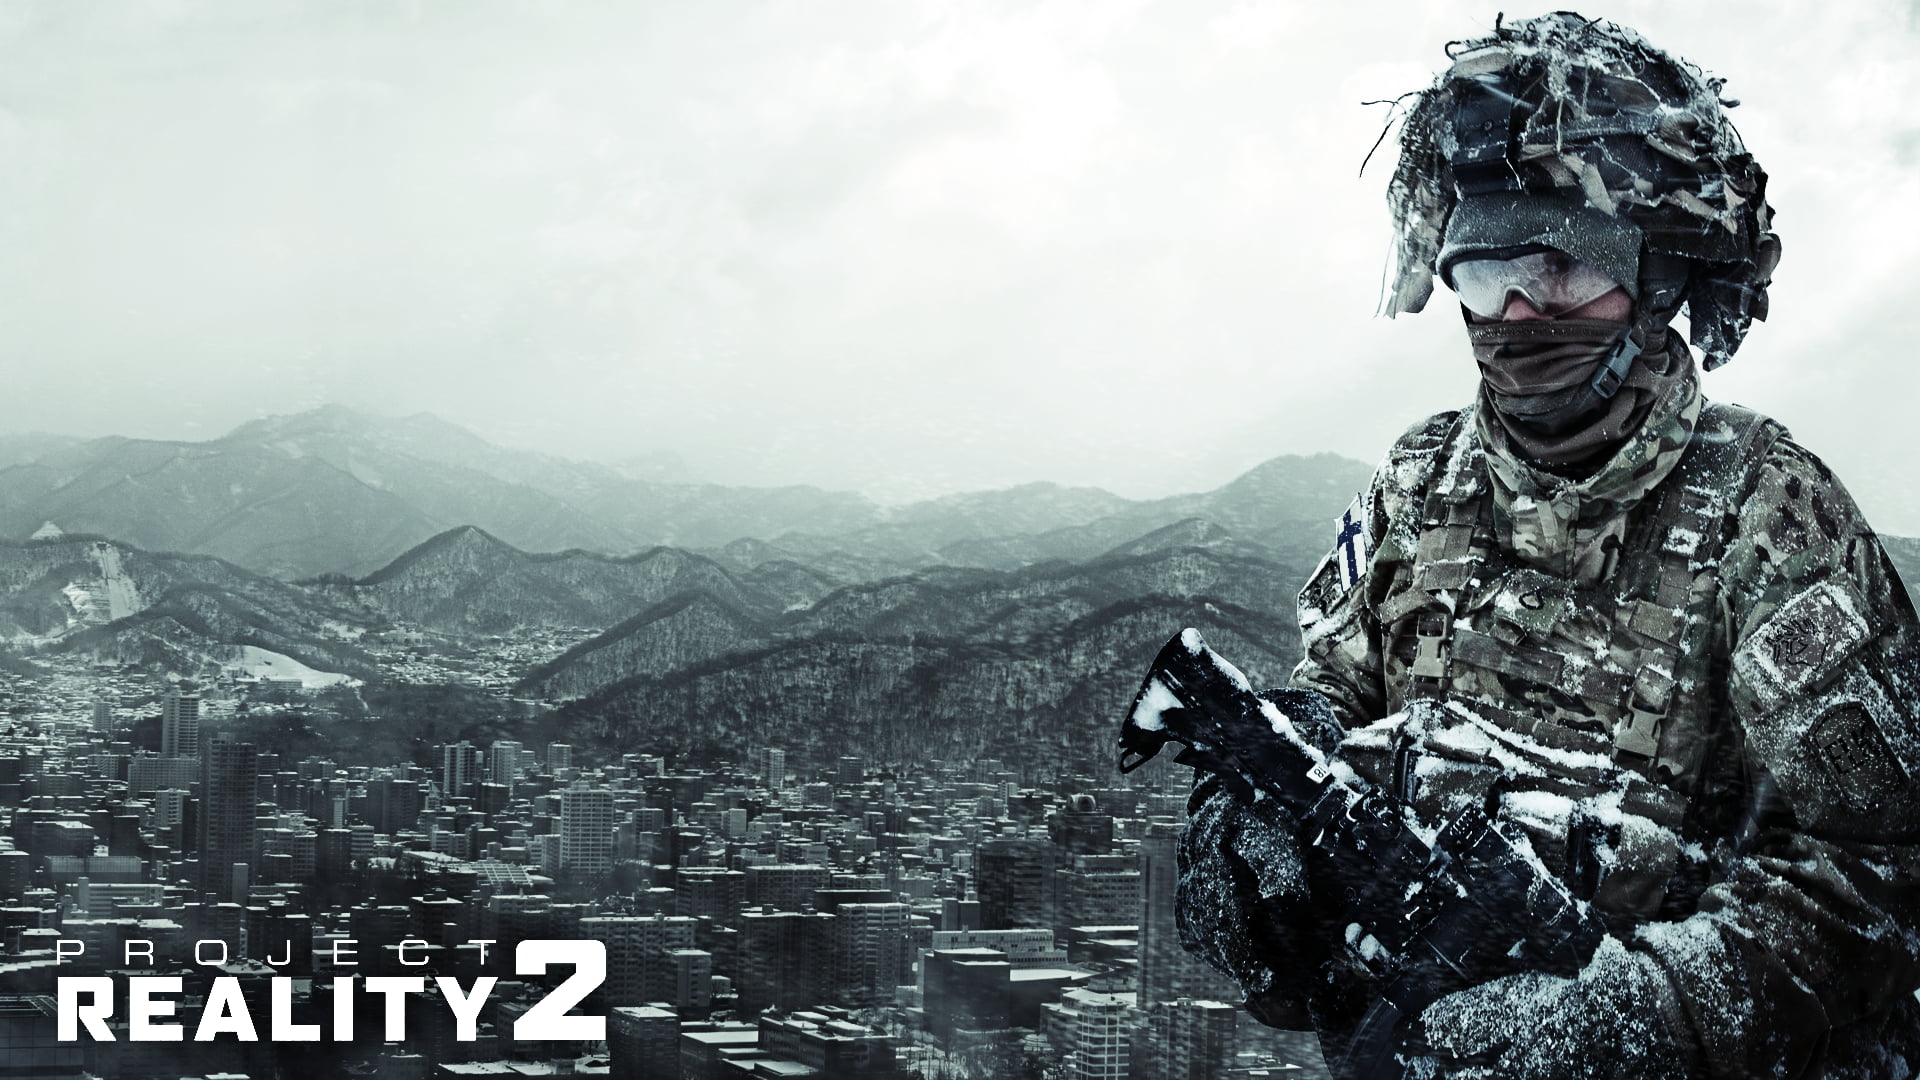 Project Reality 2 wallpaper, soldier, war, military, mountain